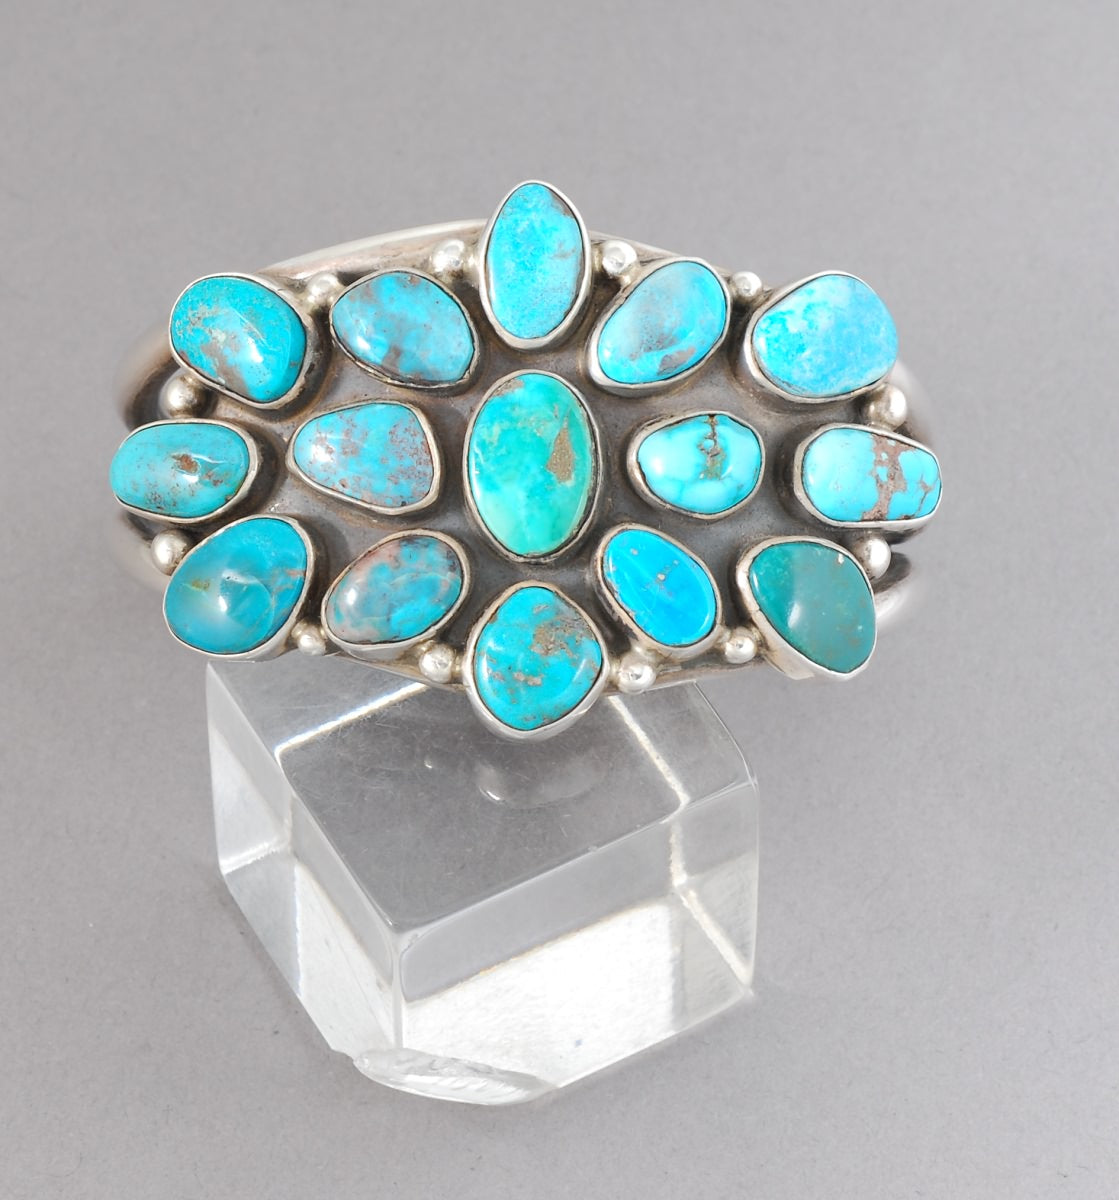 Cuff Bracelet with Bisbee Turquoise Cluster by Sheila Becenti